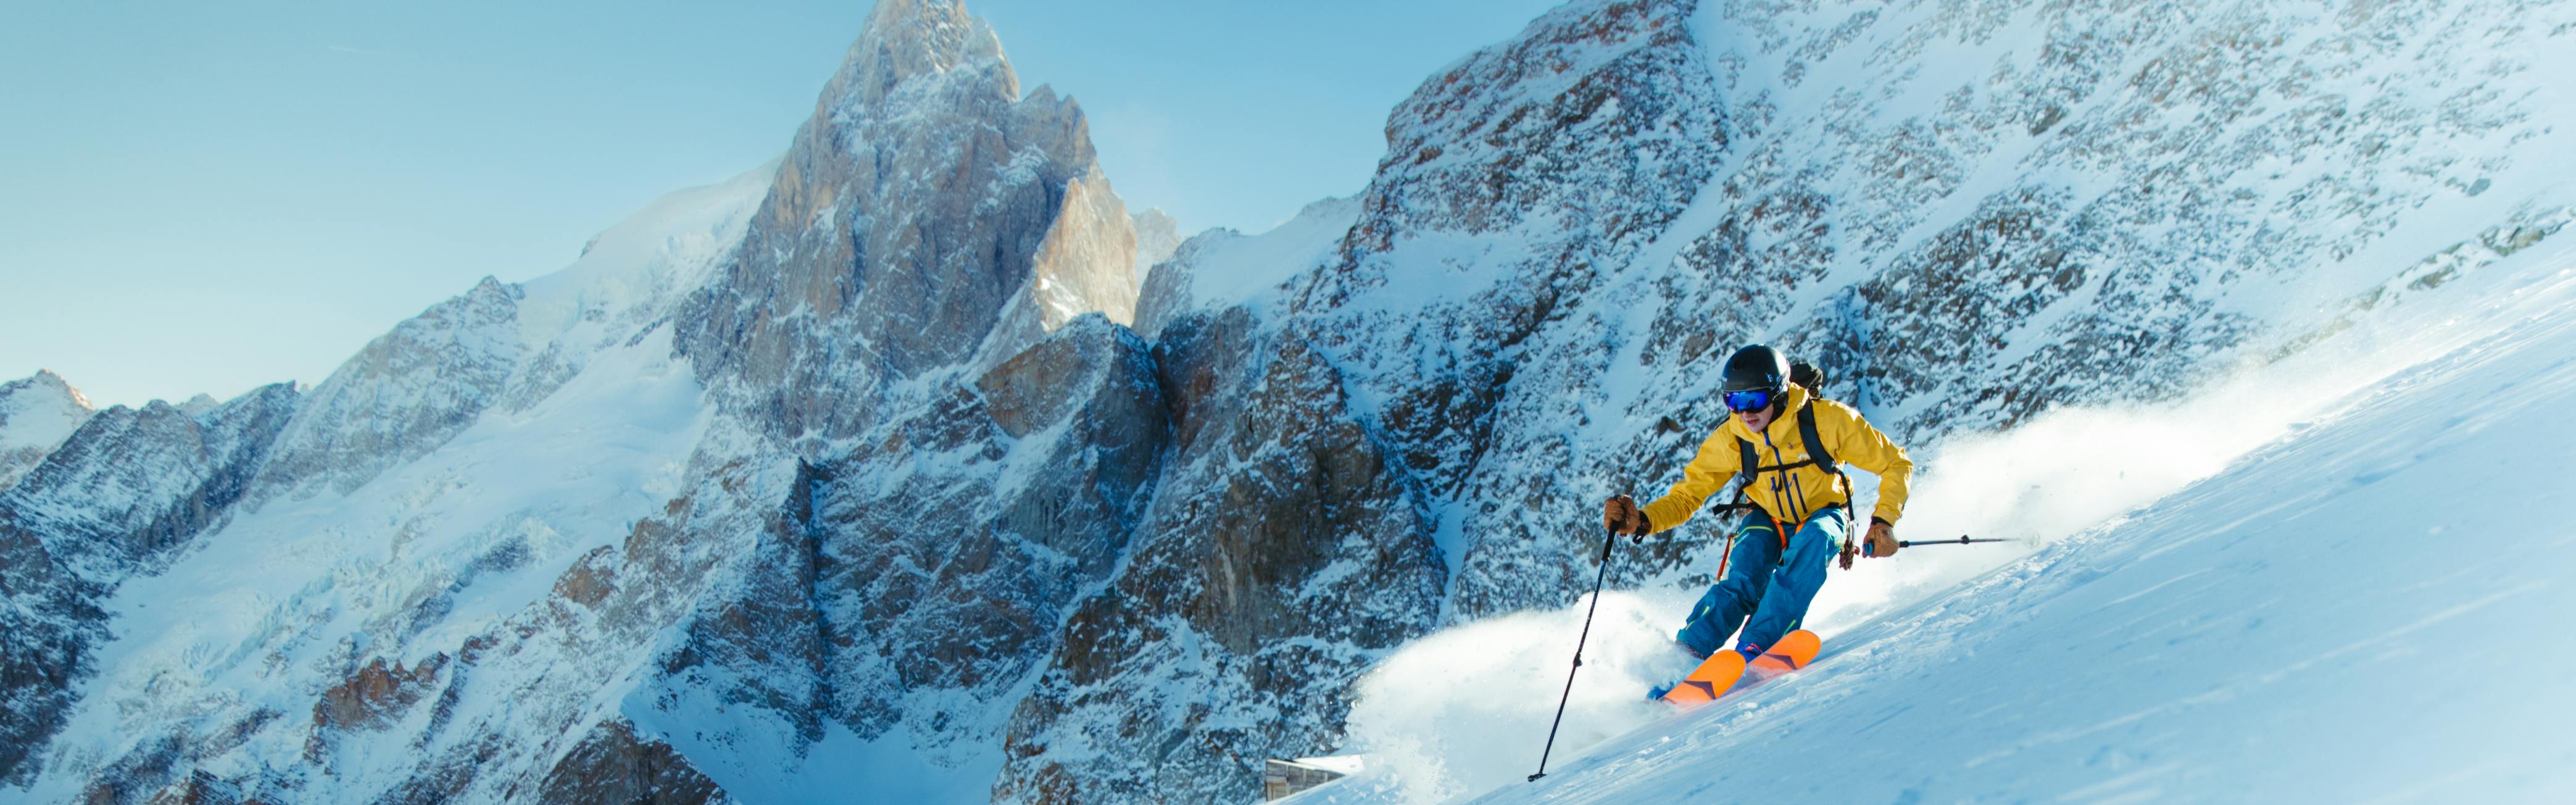 An Expert Guide to Rossignol Skis